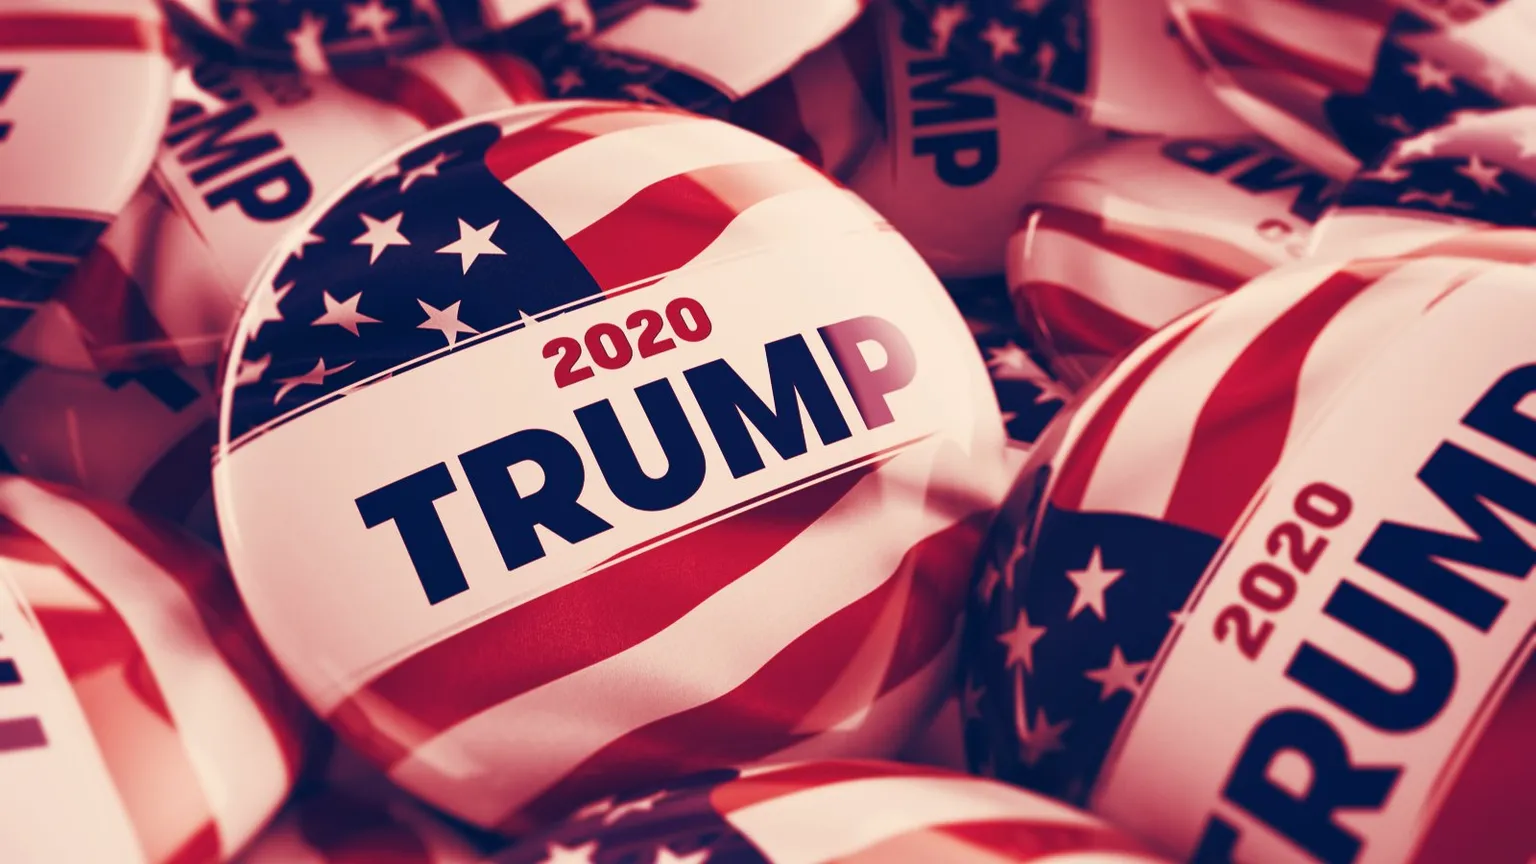 Trump 2020 app is collecting very large amounts of user data from voters. Image: Shutterstock